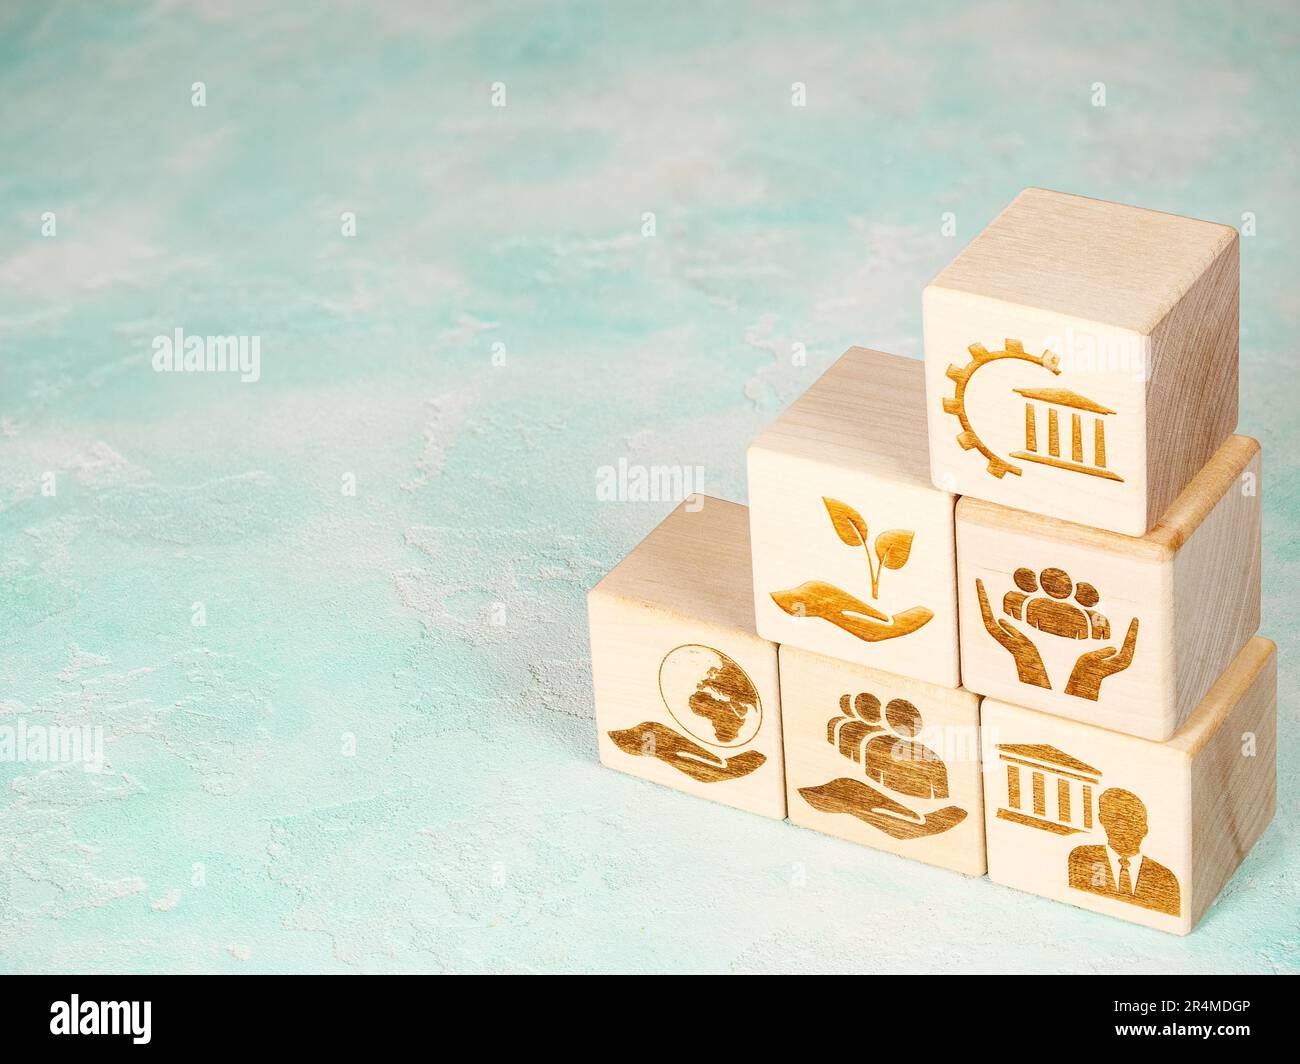 ESG symbols as a concept of corporate governance and environmental conservation Stock Photo